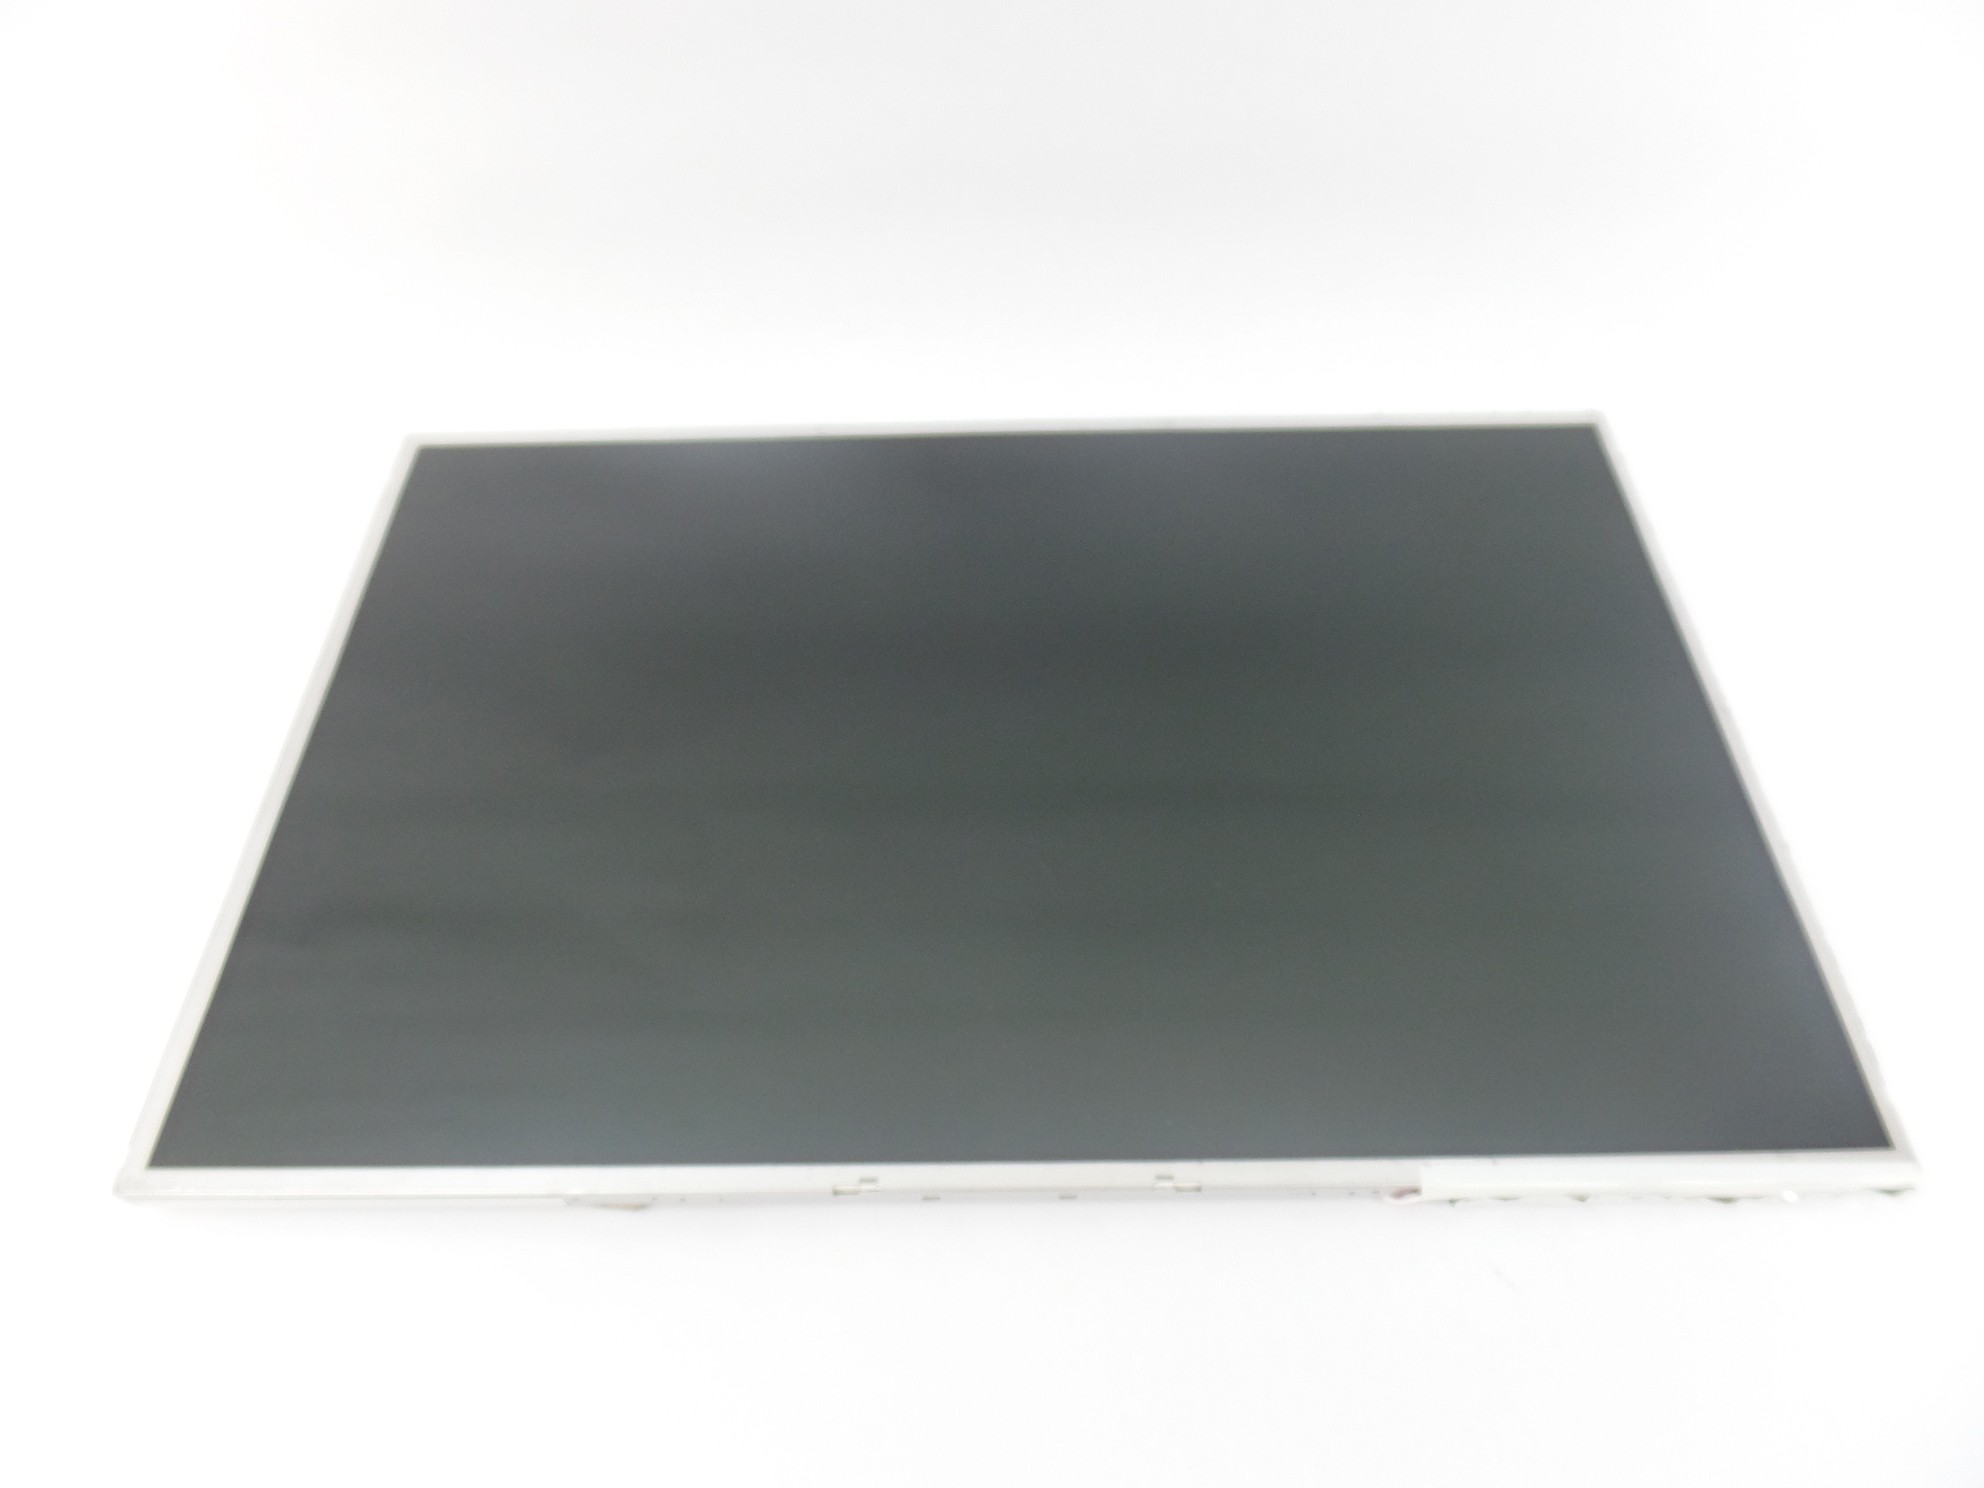 15.4" LCD Screen for HP Compaq 6720t